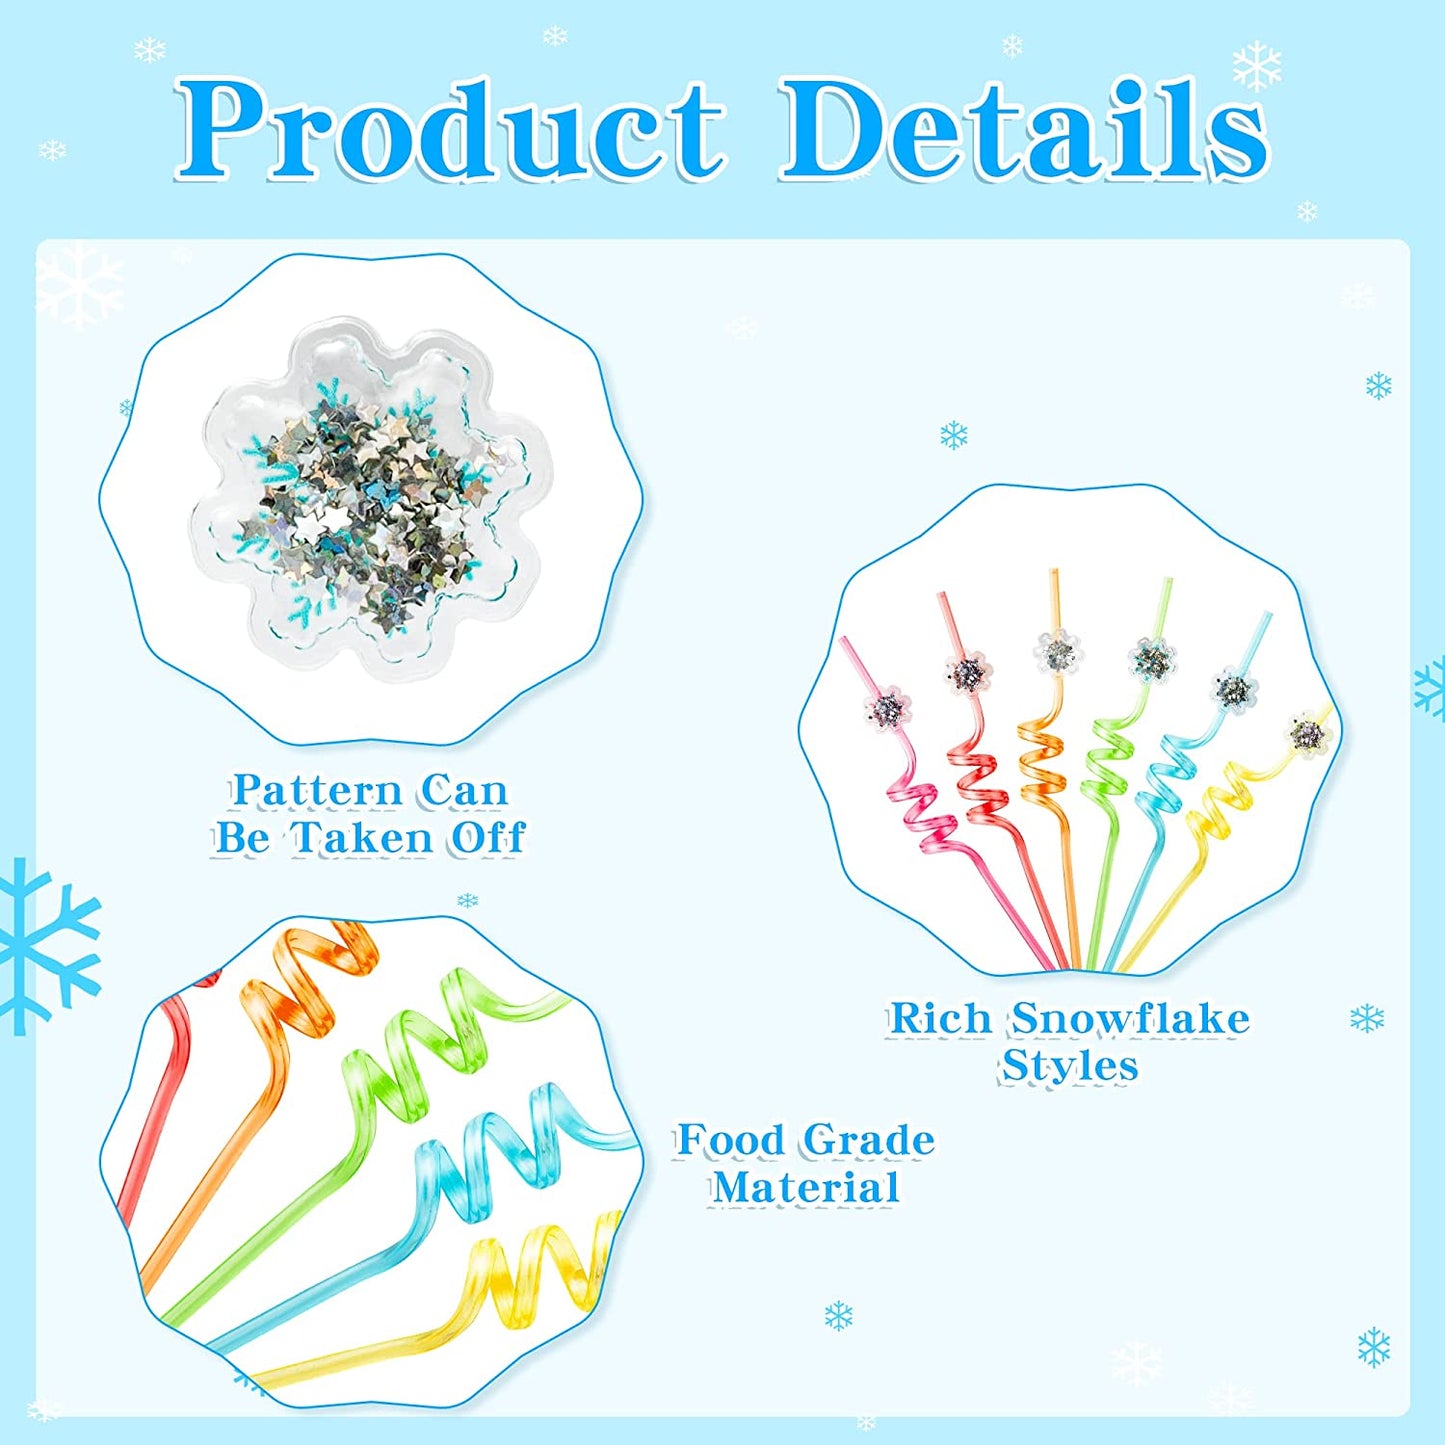 BkeeCten 24PCS Christmas Party Favors Xams Drinking Straws Snowflakes Plastic Reusable Straw with 2 PCS Cleaning Brushes Xmas Gifts for Kids Winter Holiday Birthday Classroom Party Decoration Supplies